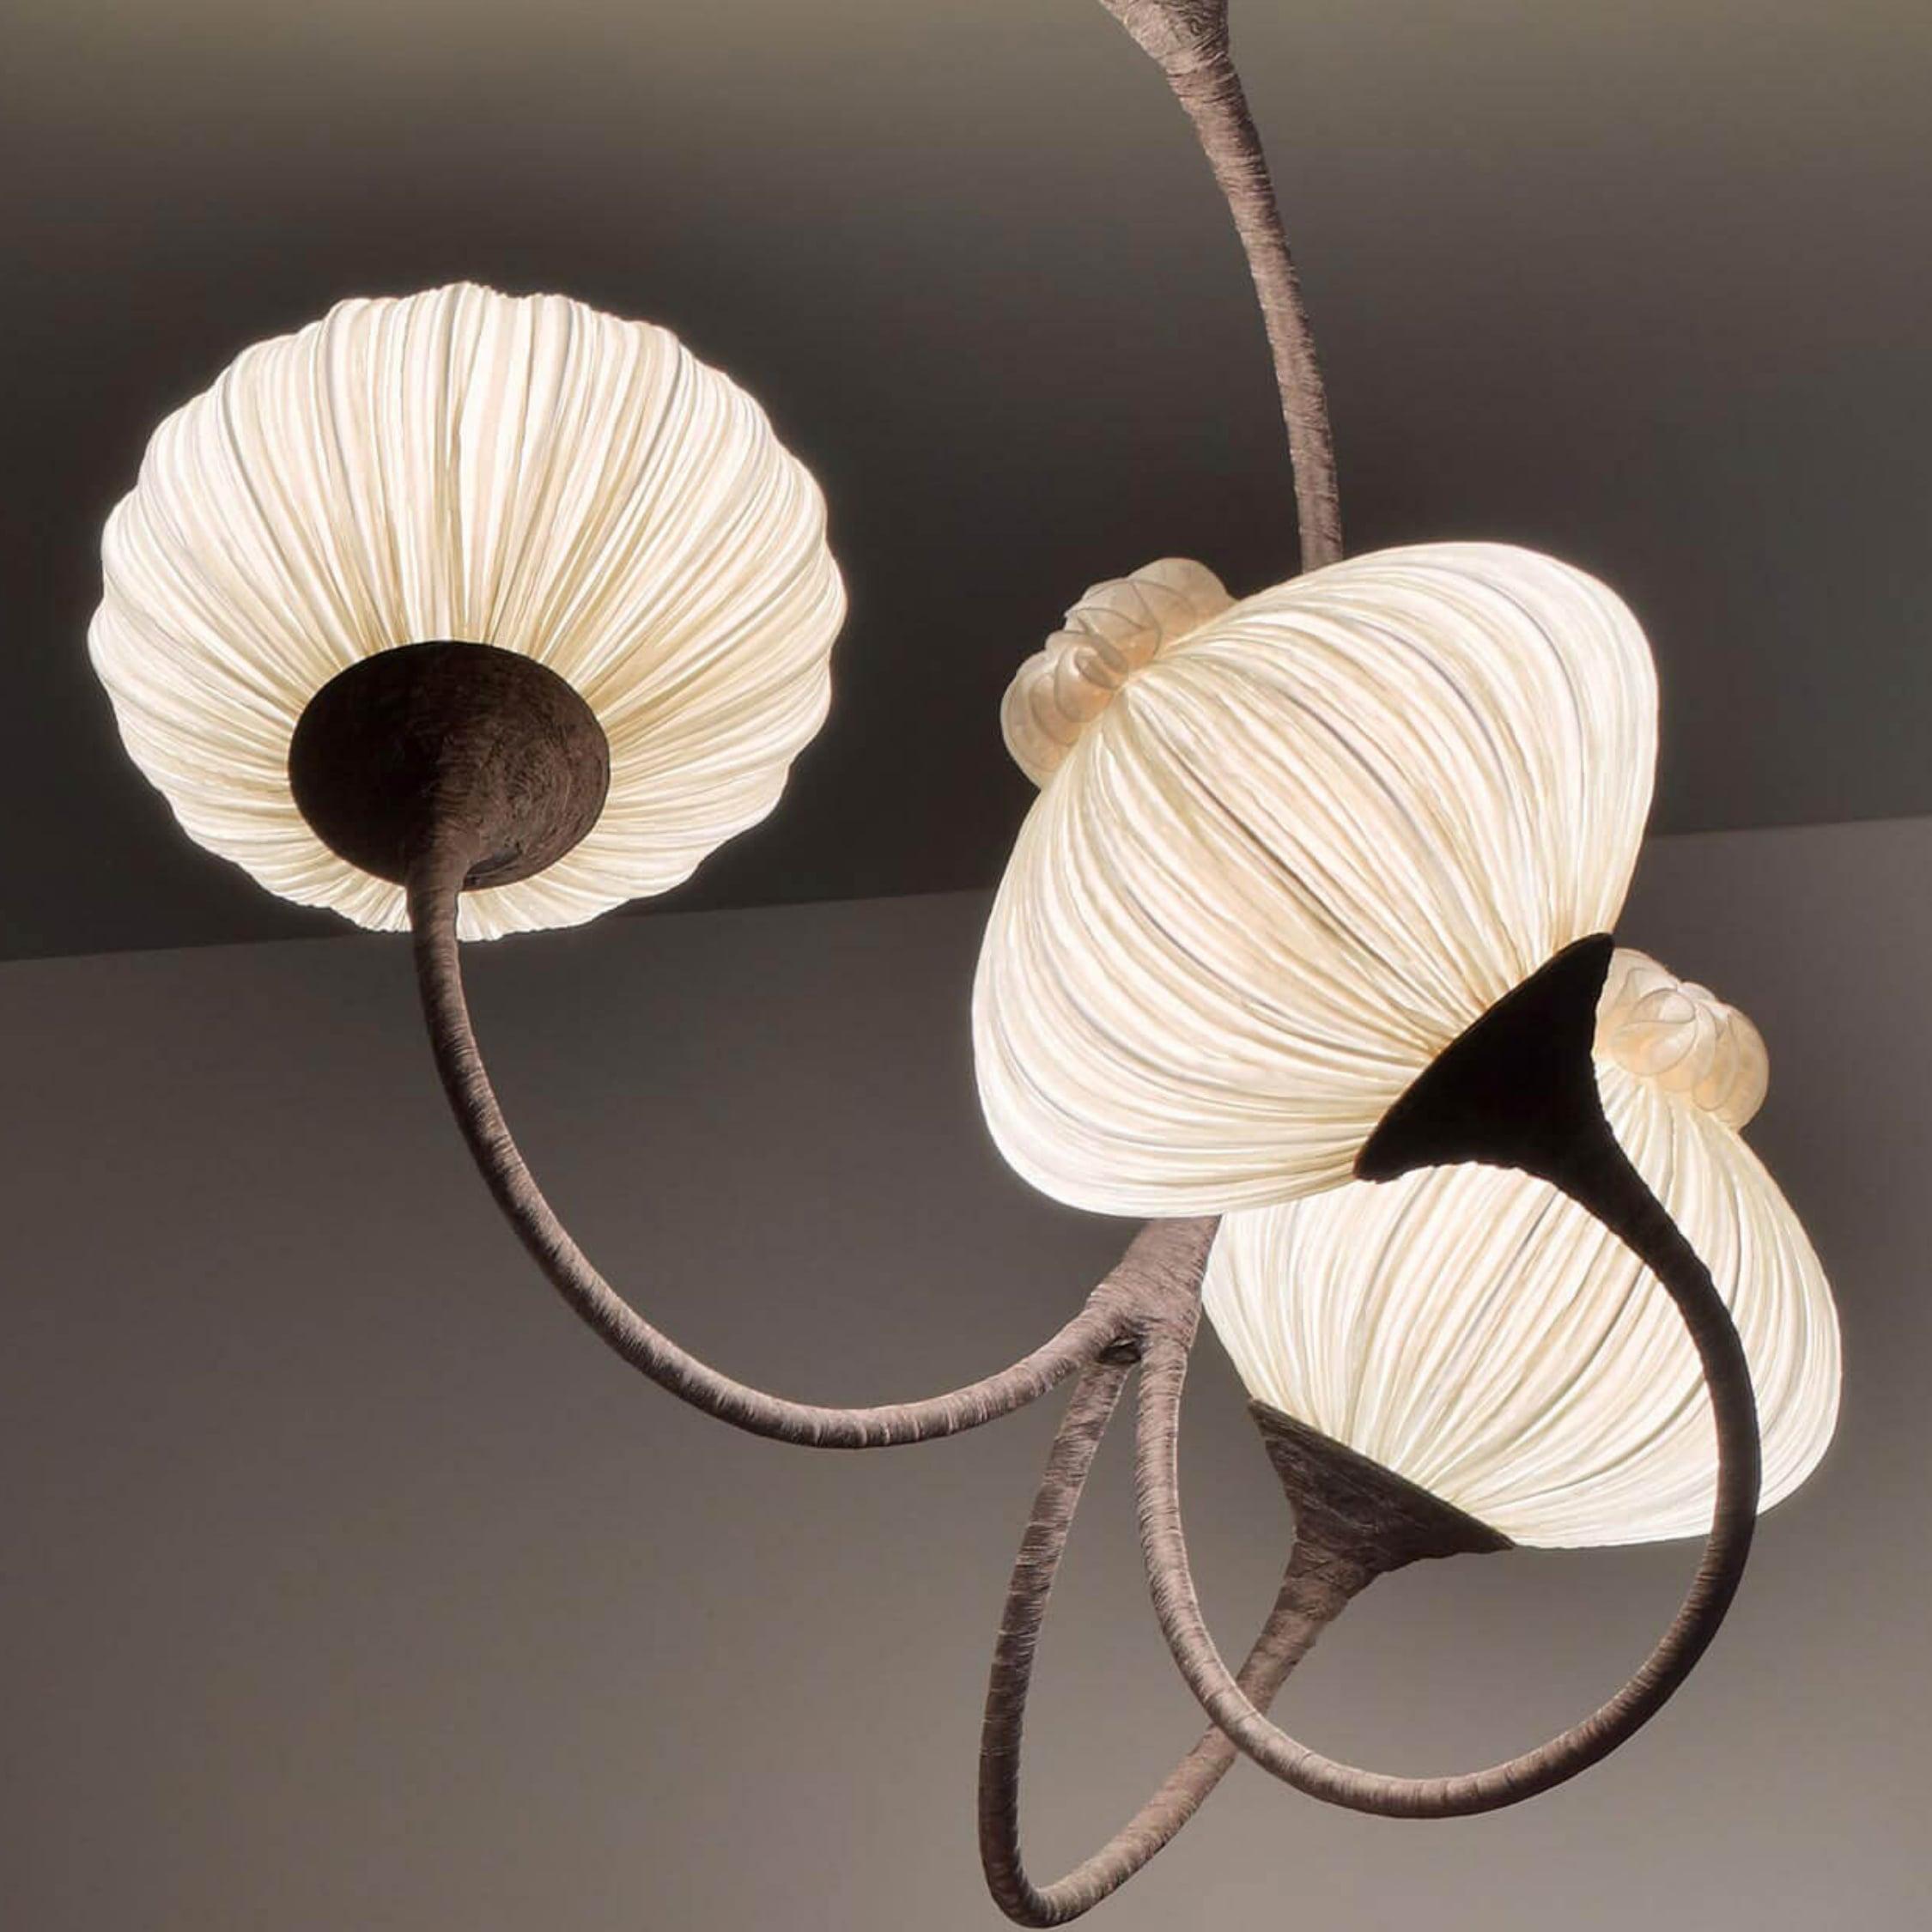 The 3 Palms chandelier is inspired by nature and plays with movement. The highly-stylized curvilinear branches of the ceiling fixture are made from hand-bent metal tubes wrapped in dark bronze organza fabric. All shades are detachable. 3 Palms